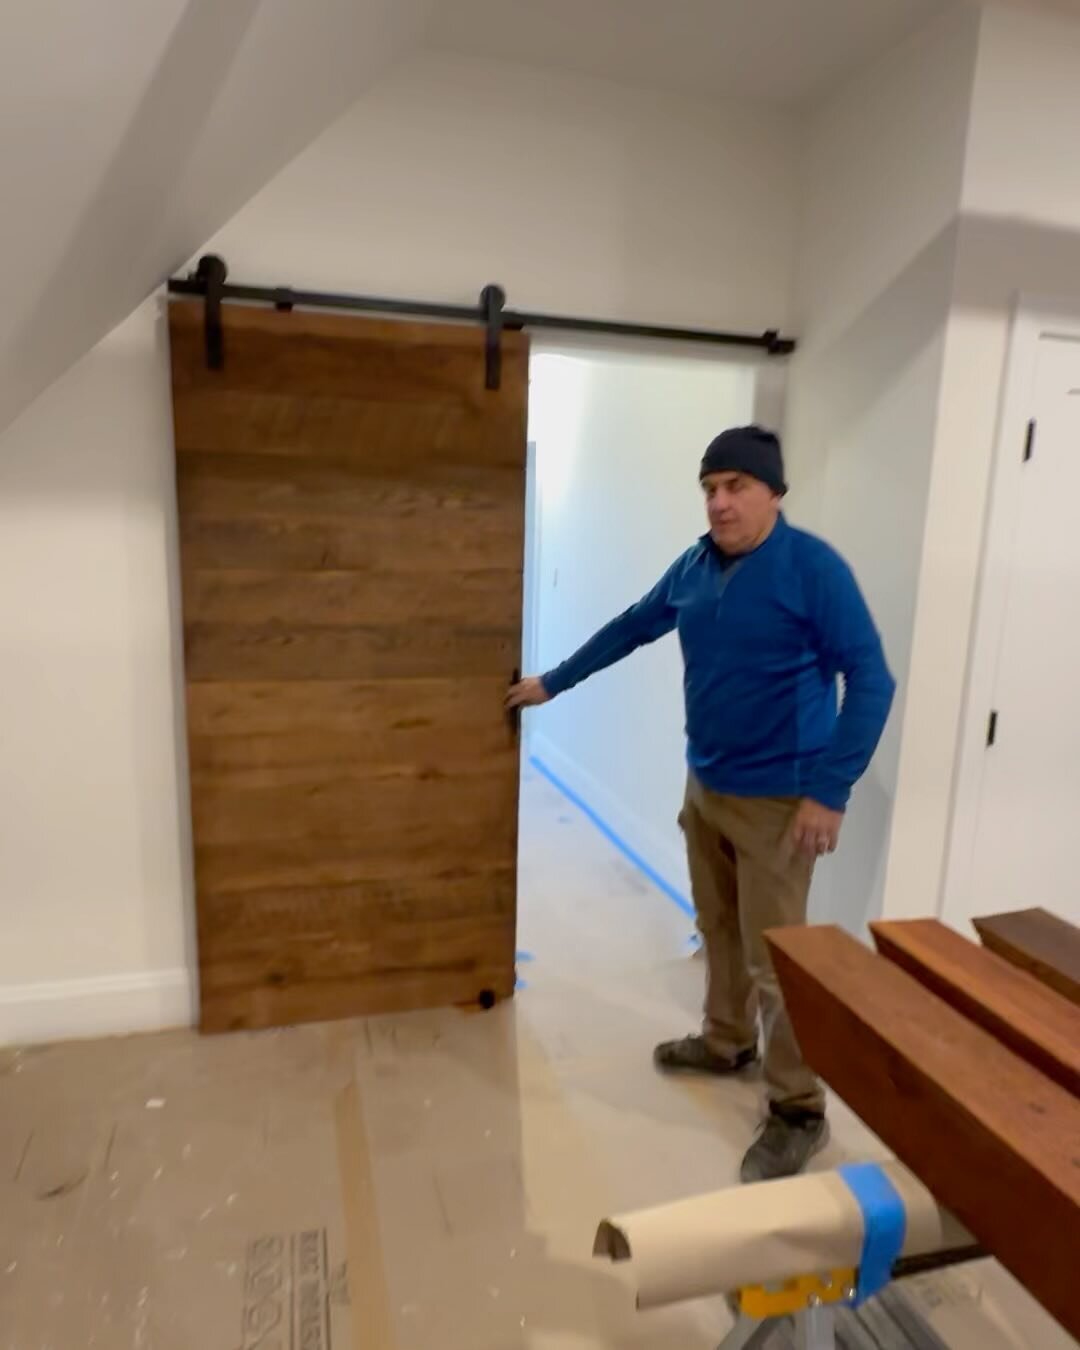 Jeremy jn Swamscott, MA is having the upstairs of his family home renovated and the family wanted this rustic, waxed horizontal design barn door in the new space.

His builder is Wolfe Design Build LLC from Swampscott and they have done a fabulous jo